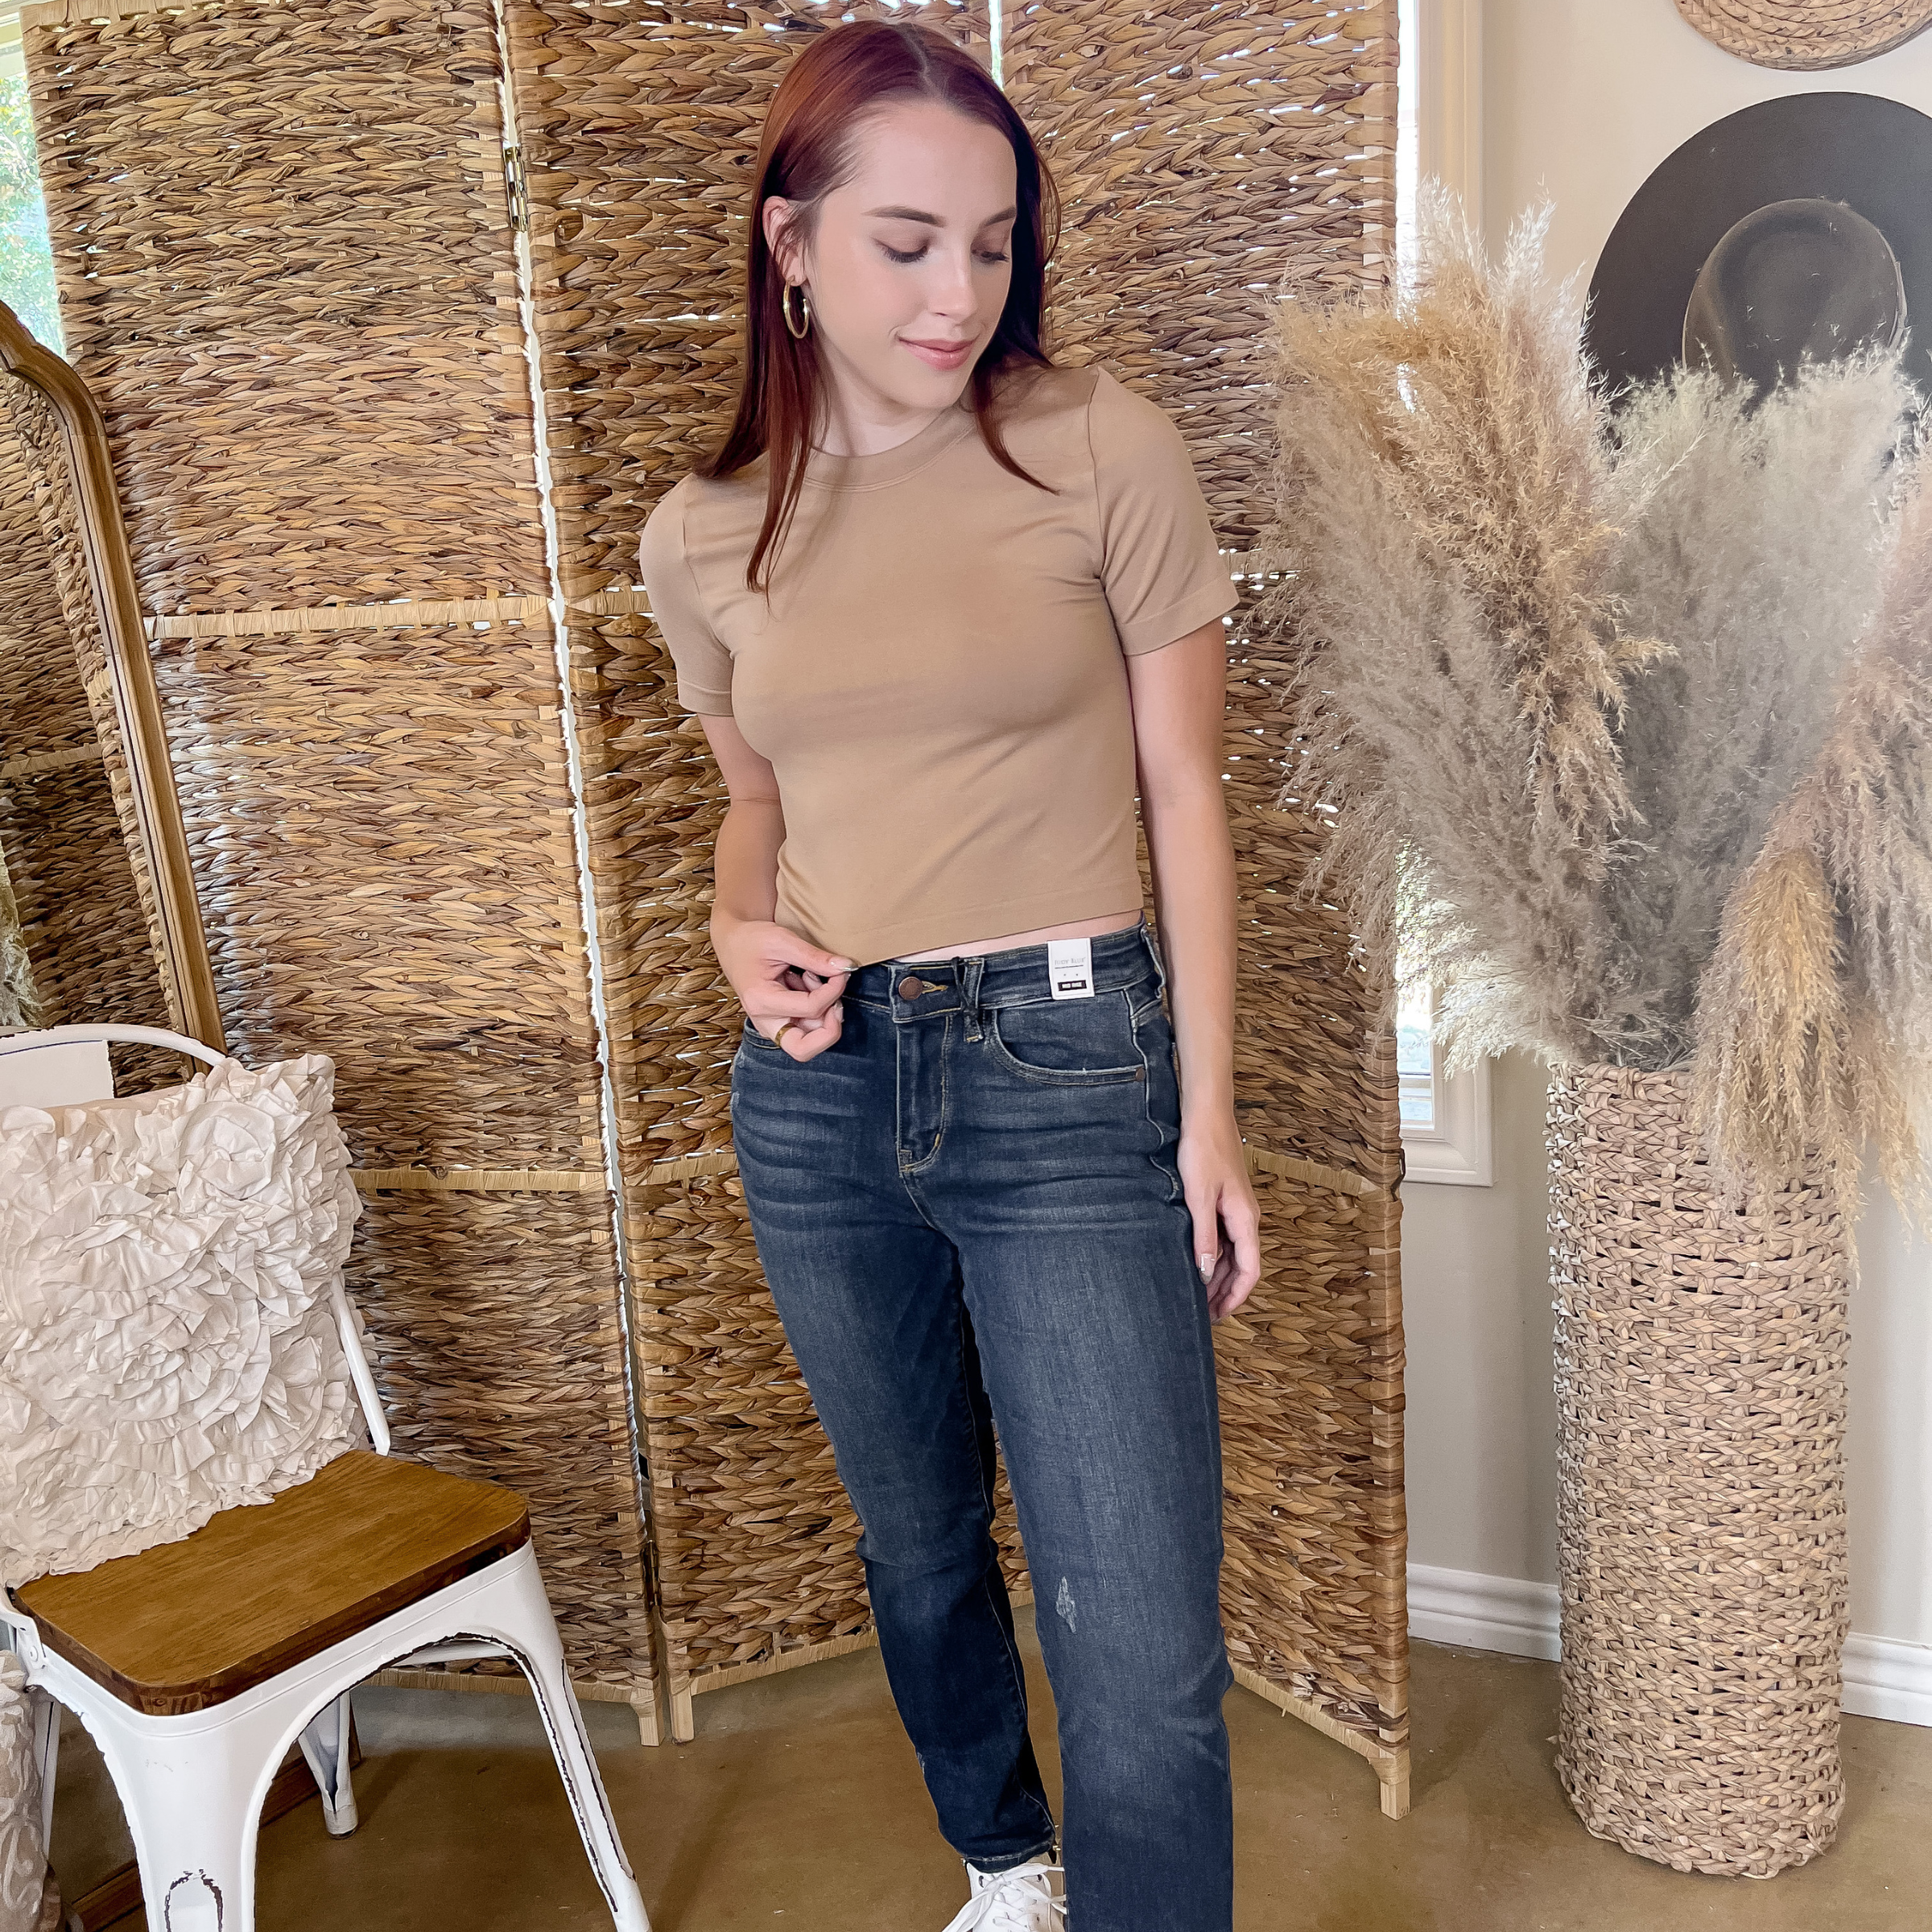 Model is wearing a nude, high neck cropped short sleeve top with dark blue jeans. She is also wearing gold hoops and white tennis shoes.